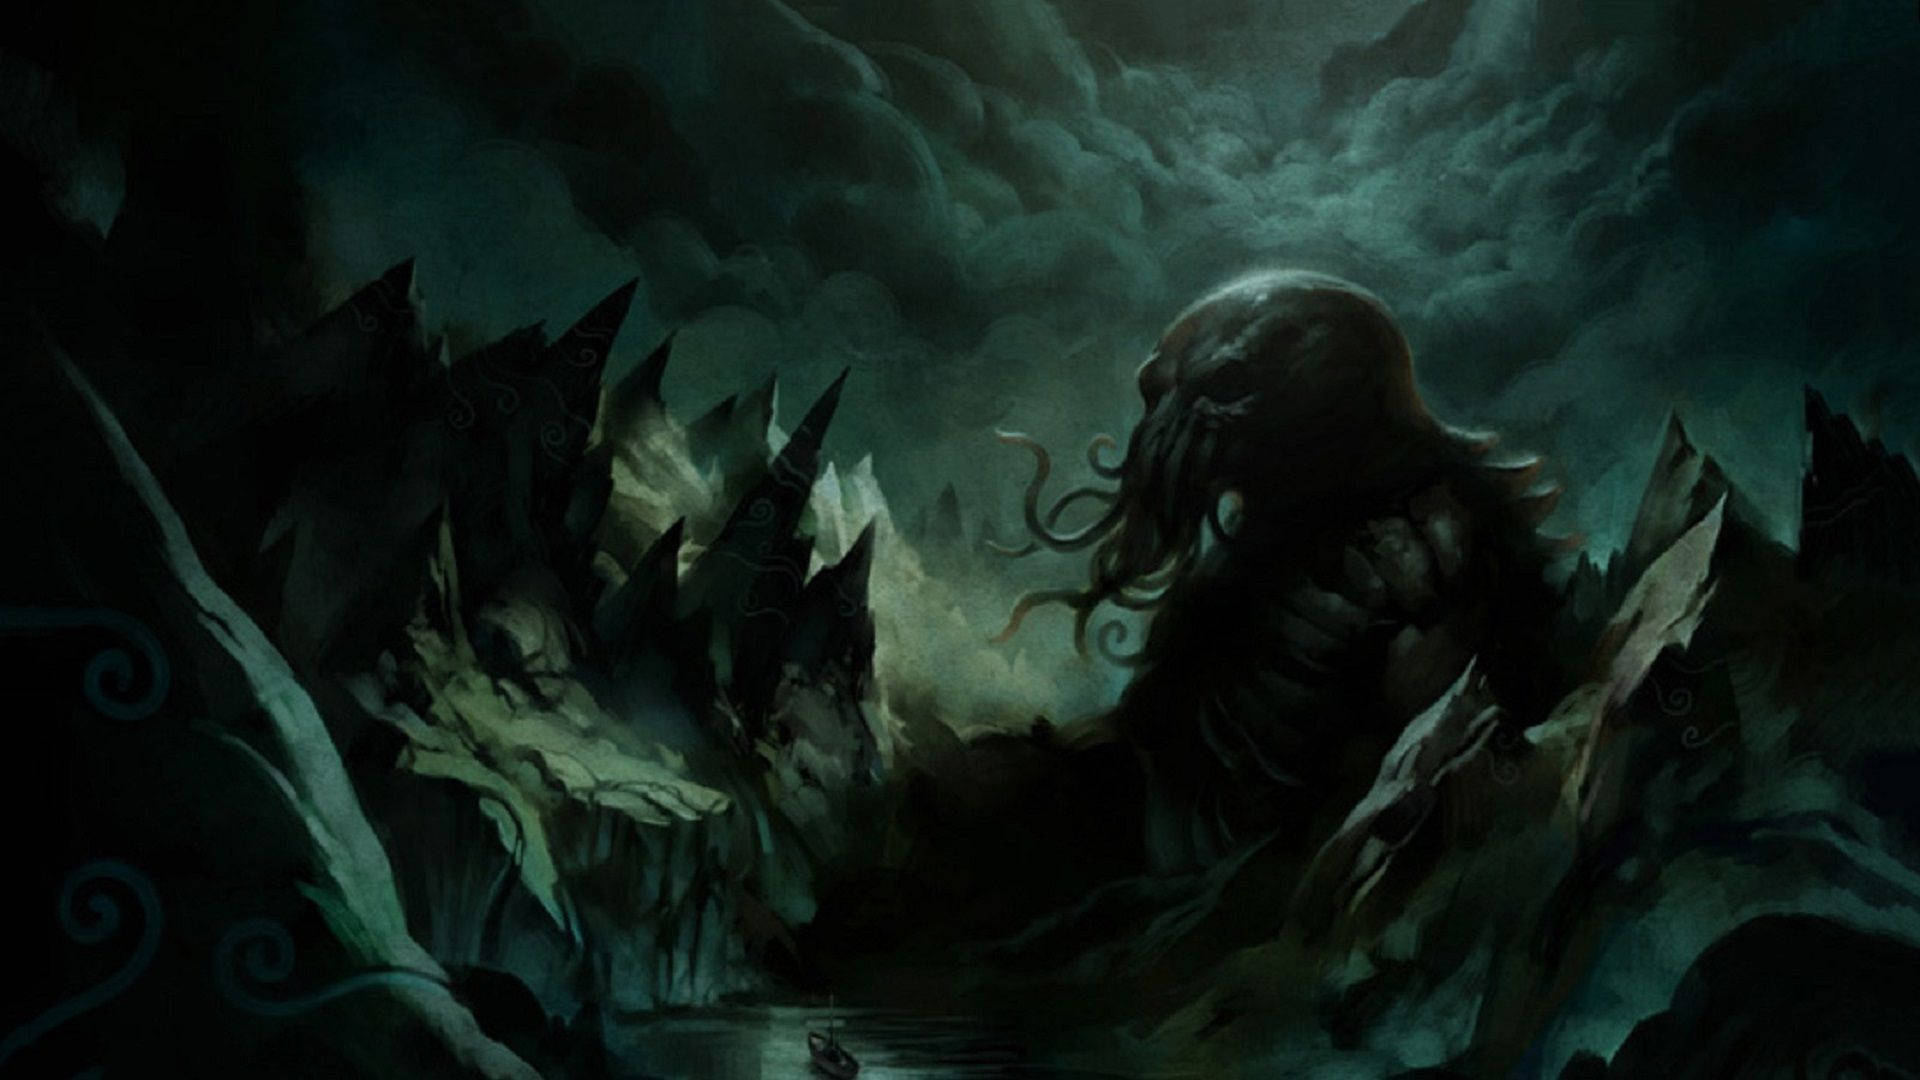 “A Tentacular Glimpse of the Mythic Creature Cthulhu” Wallpaper